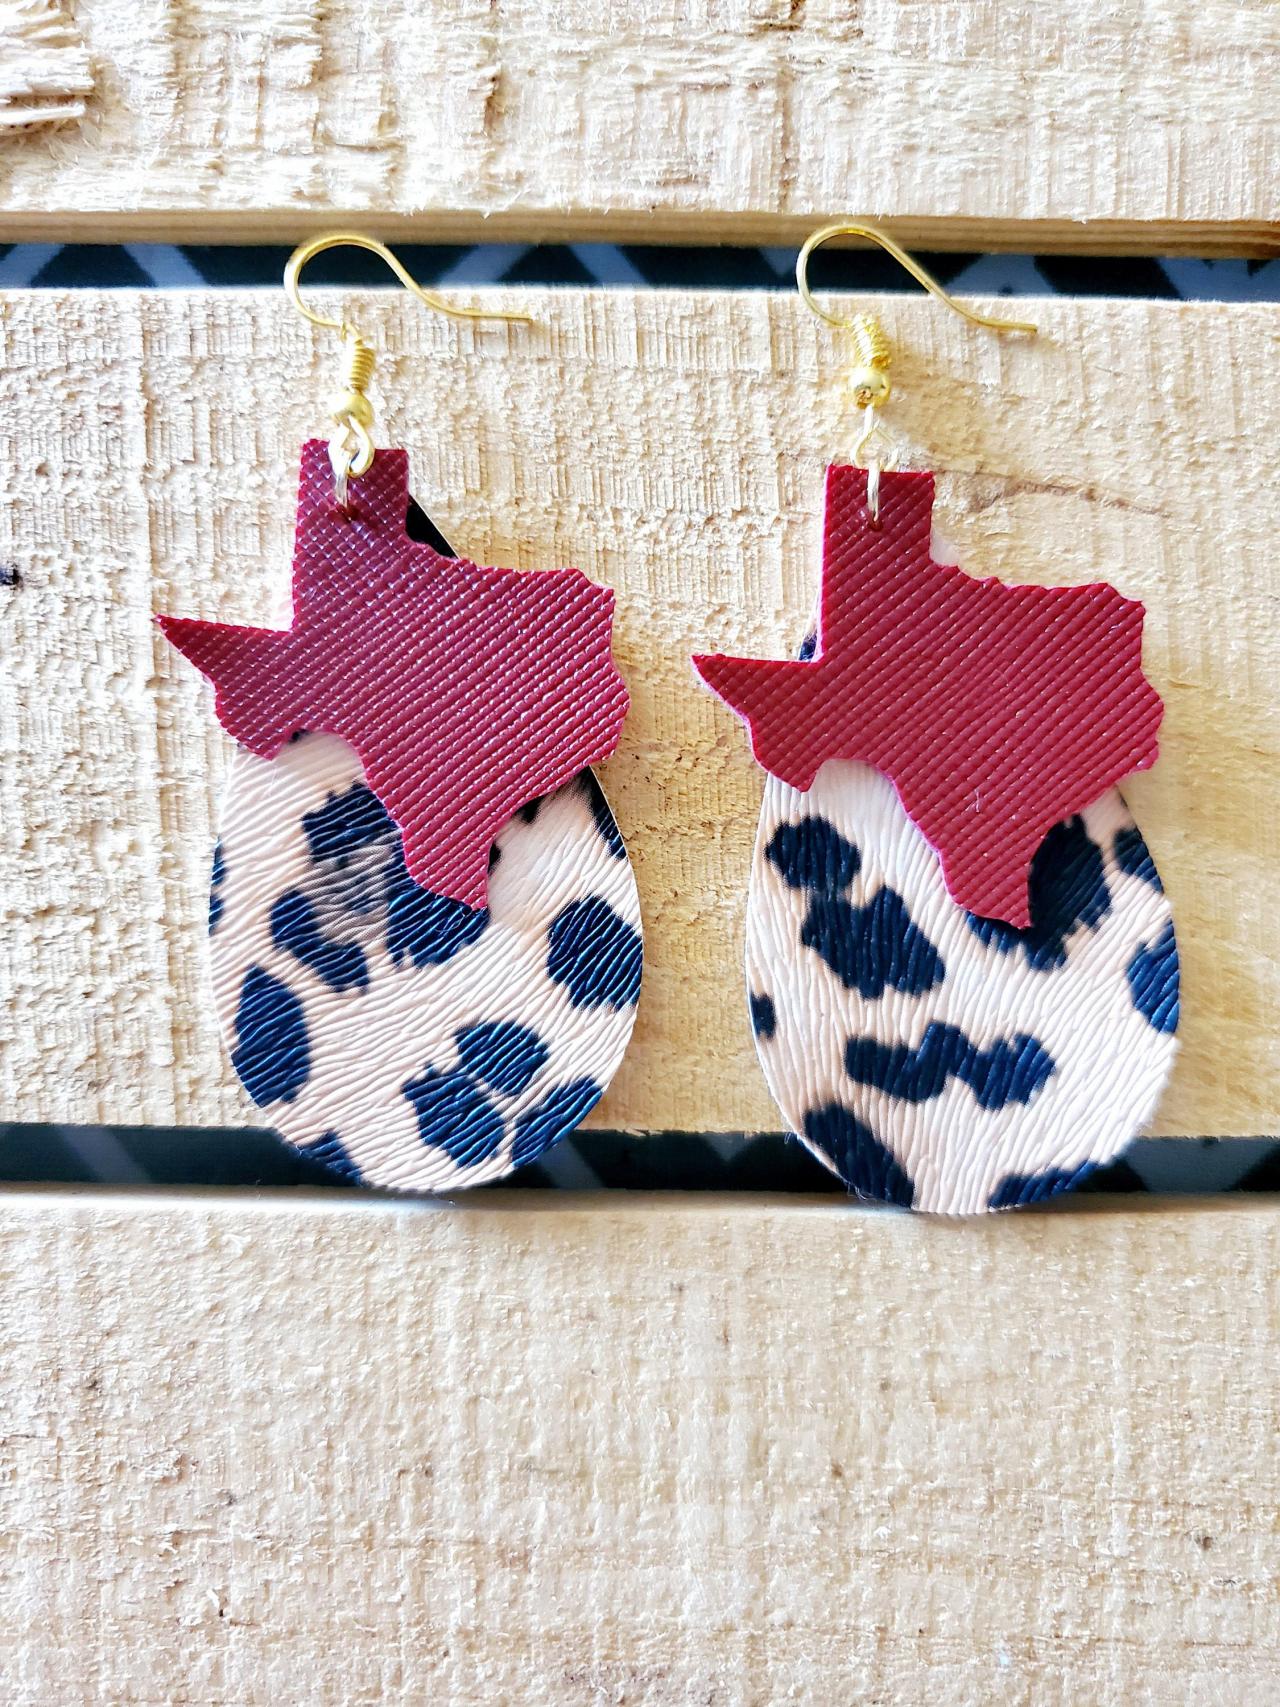 Leopard Print Layered Leather Earrings, State Of Texas Leather Earrings, Texas Jewelry, Animal Print Jewelry, Stacked Earrings, Trendy